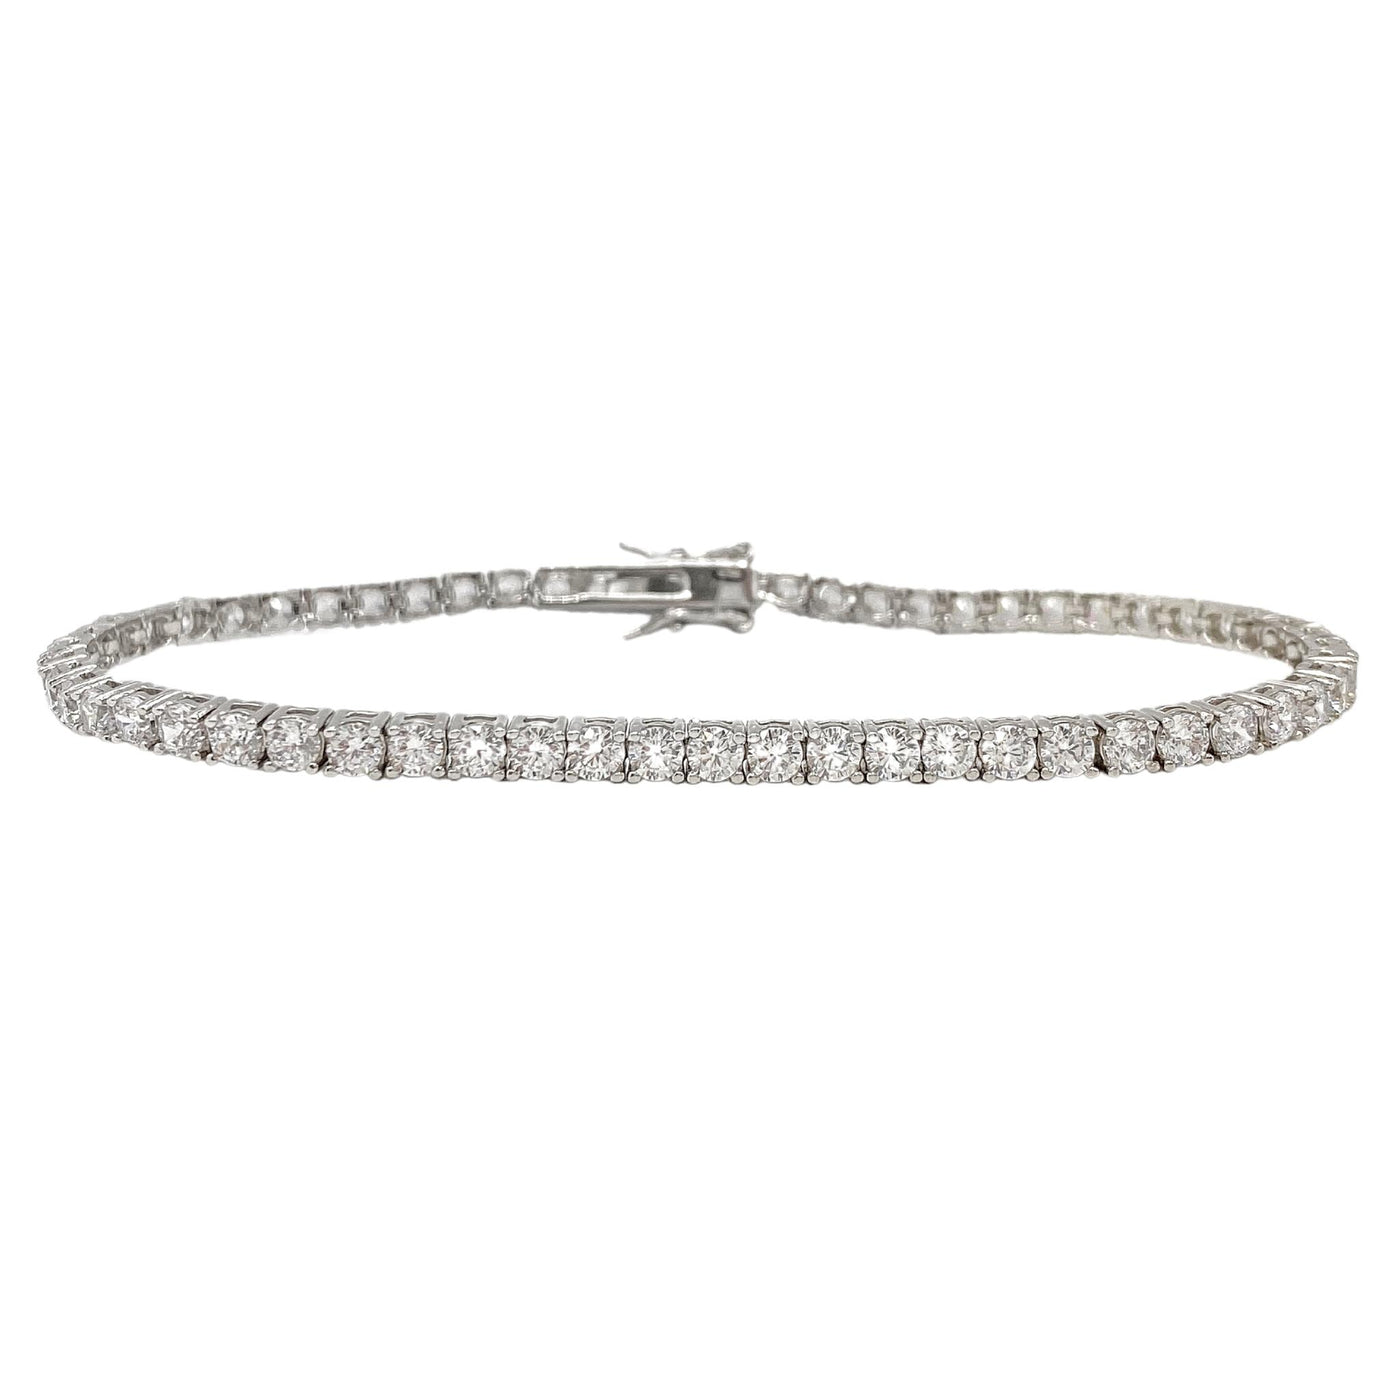 Silver casting tennis bracelet with white round stones - 3 mm